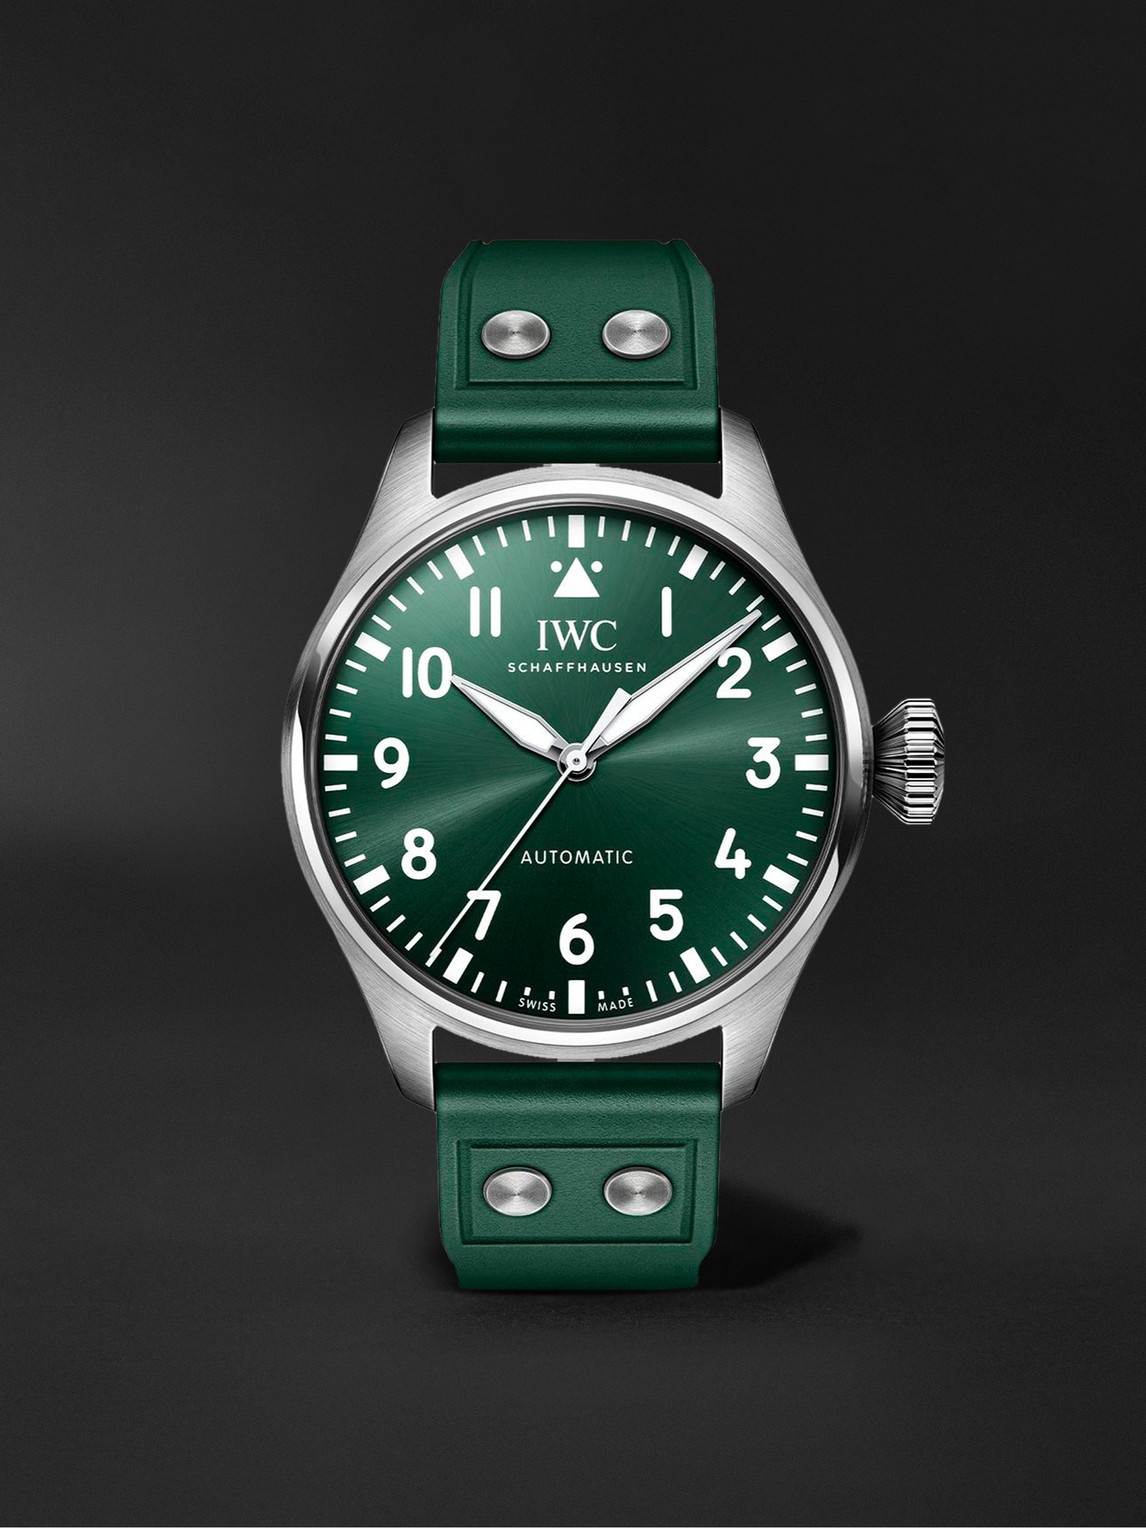 Iwc Schaffhausen Big Pilot's Automatic 43mm Stainless Steel And Rubber Watch, Ref. No. Iw329306 In Green